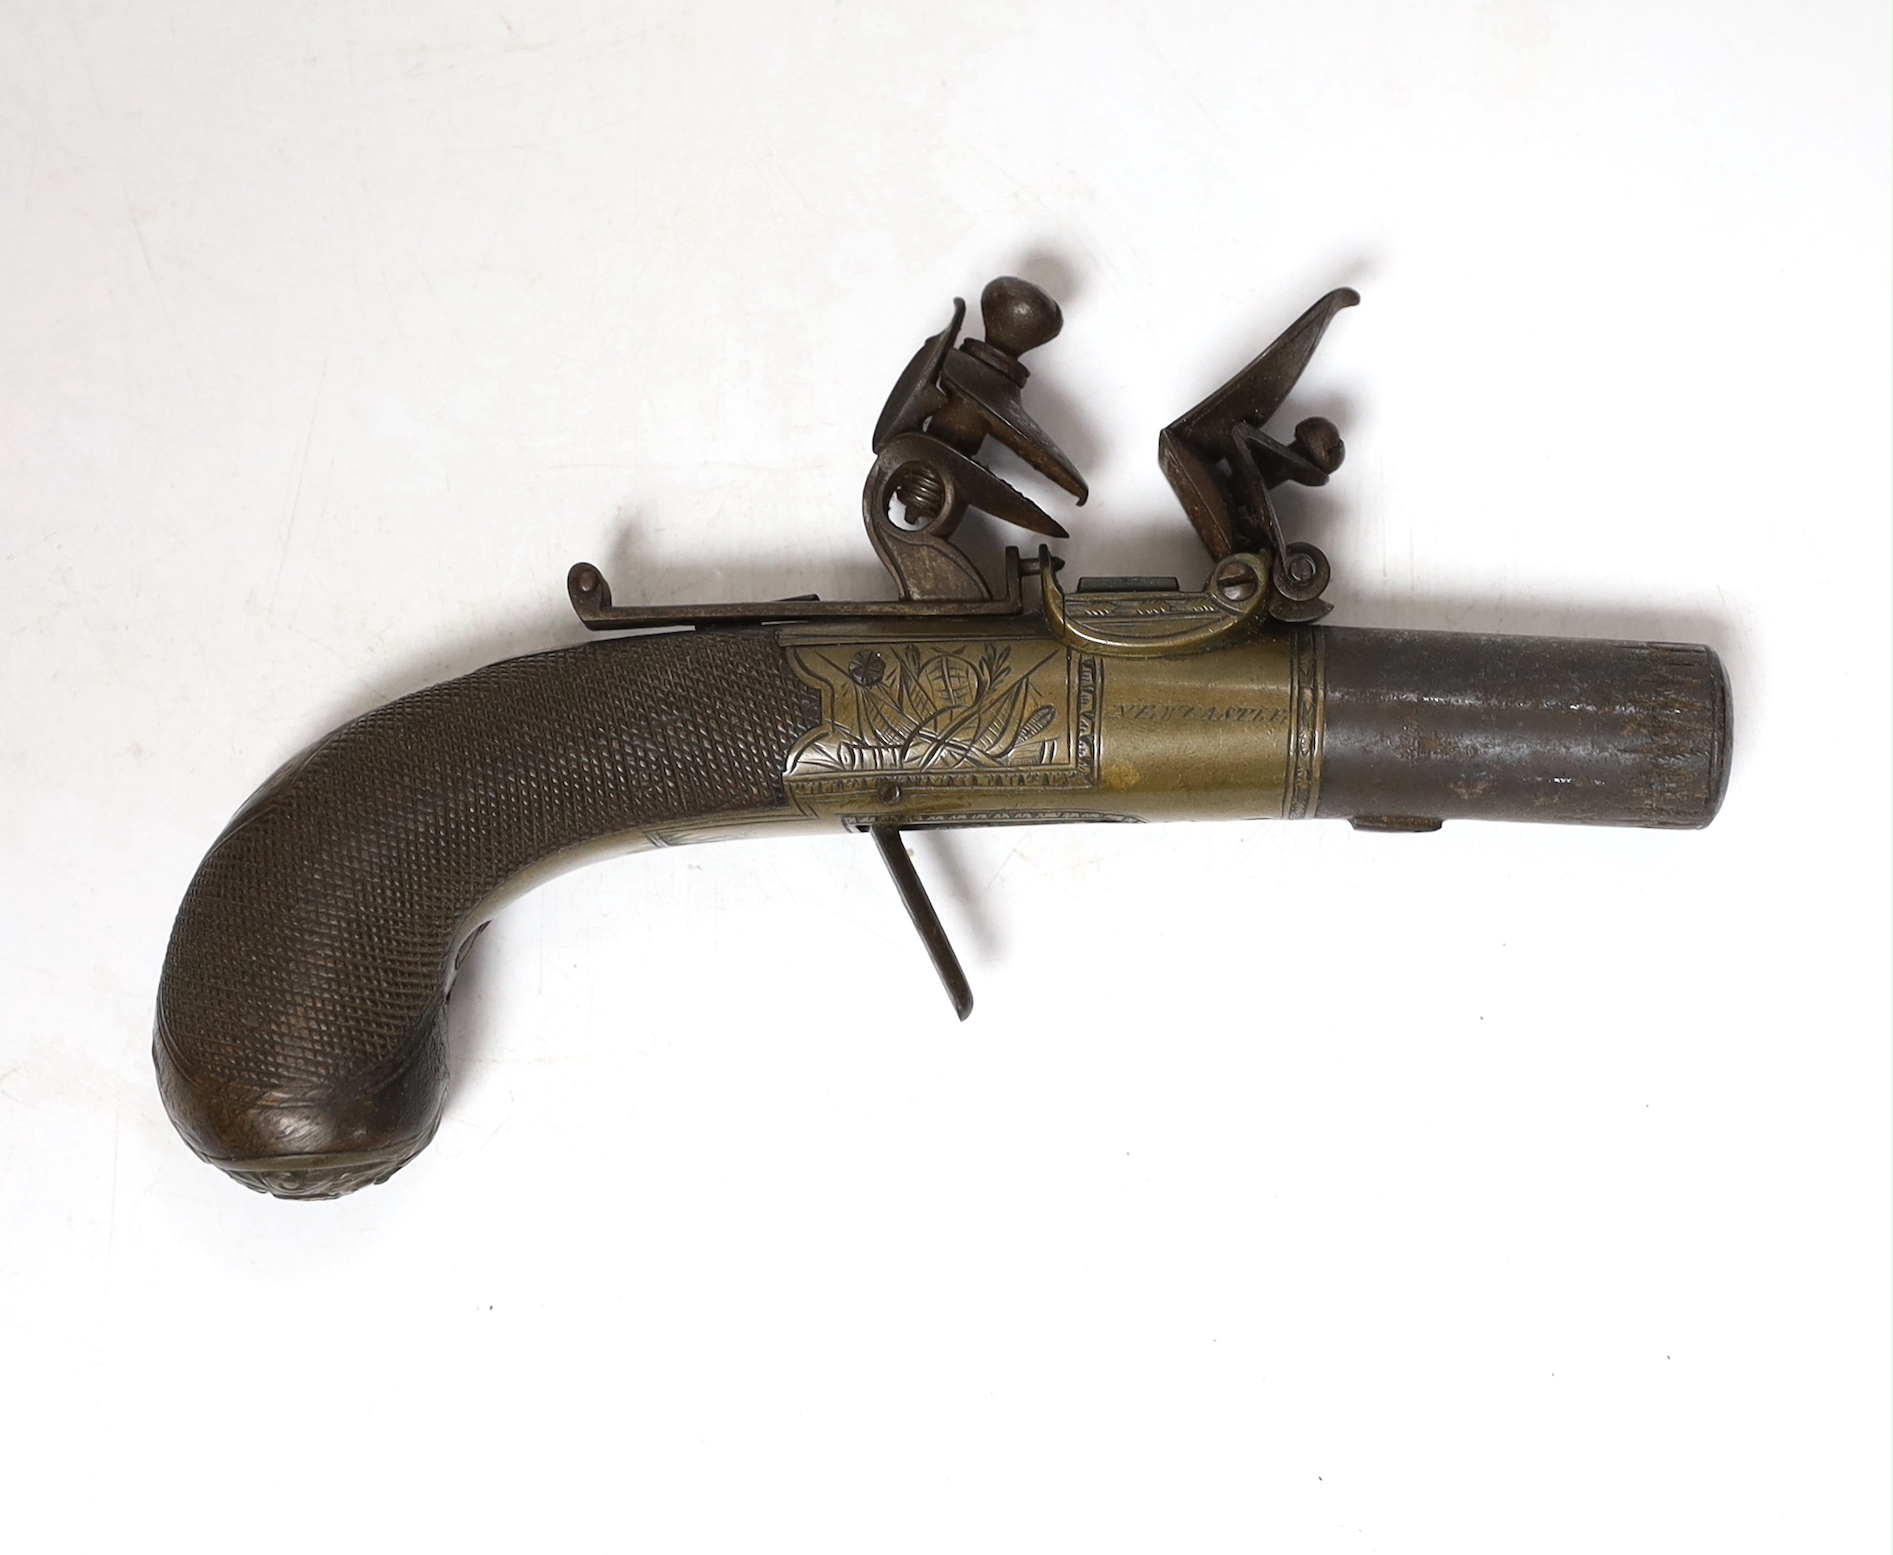 An early 19th century Flintlock pocket pistol by Gardner, with engraved lock, chequered walnut stock and turn off barrel